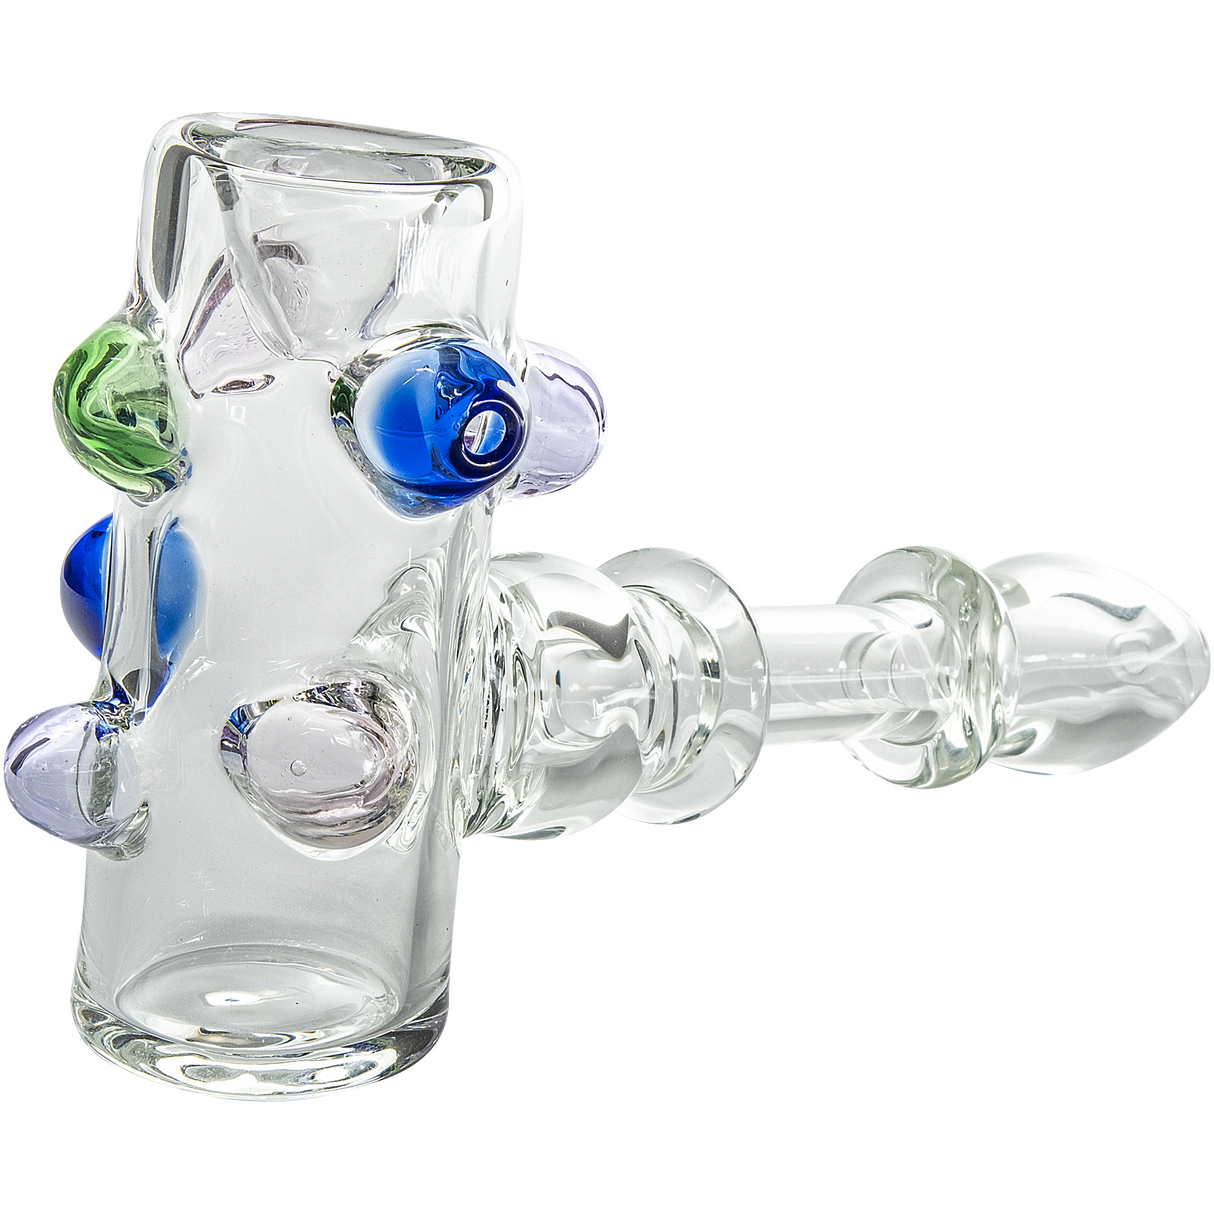 LA Pipes Wonka Will 5.5" Briar-Shaped Borosilicate Glass Pipe with Color Marbles